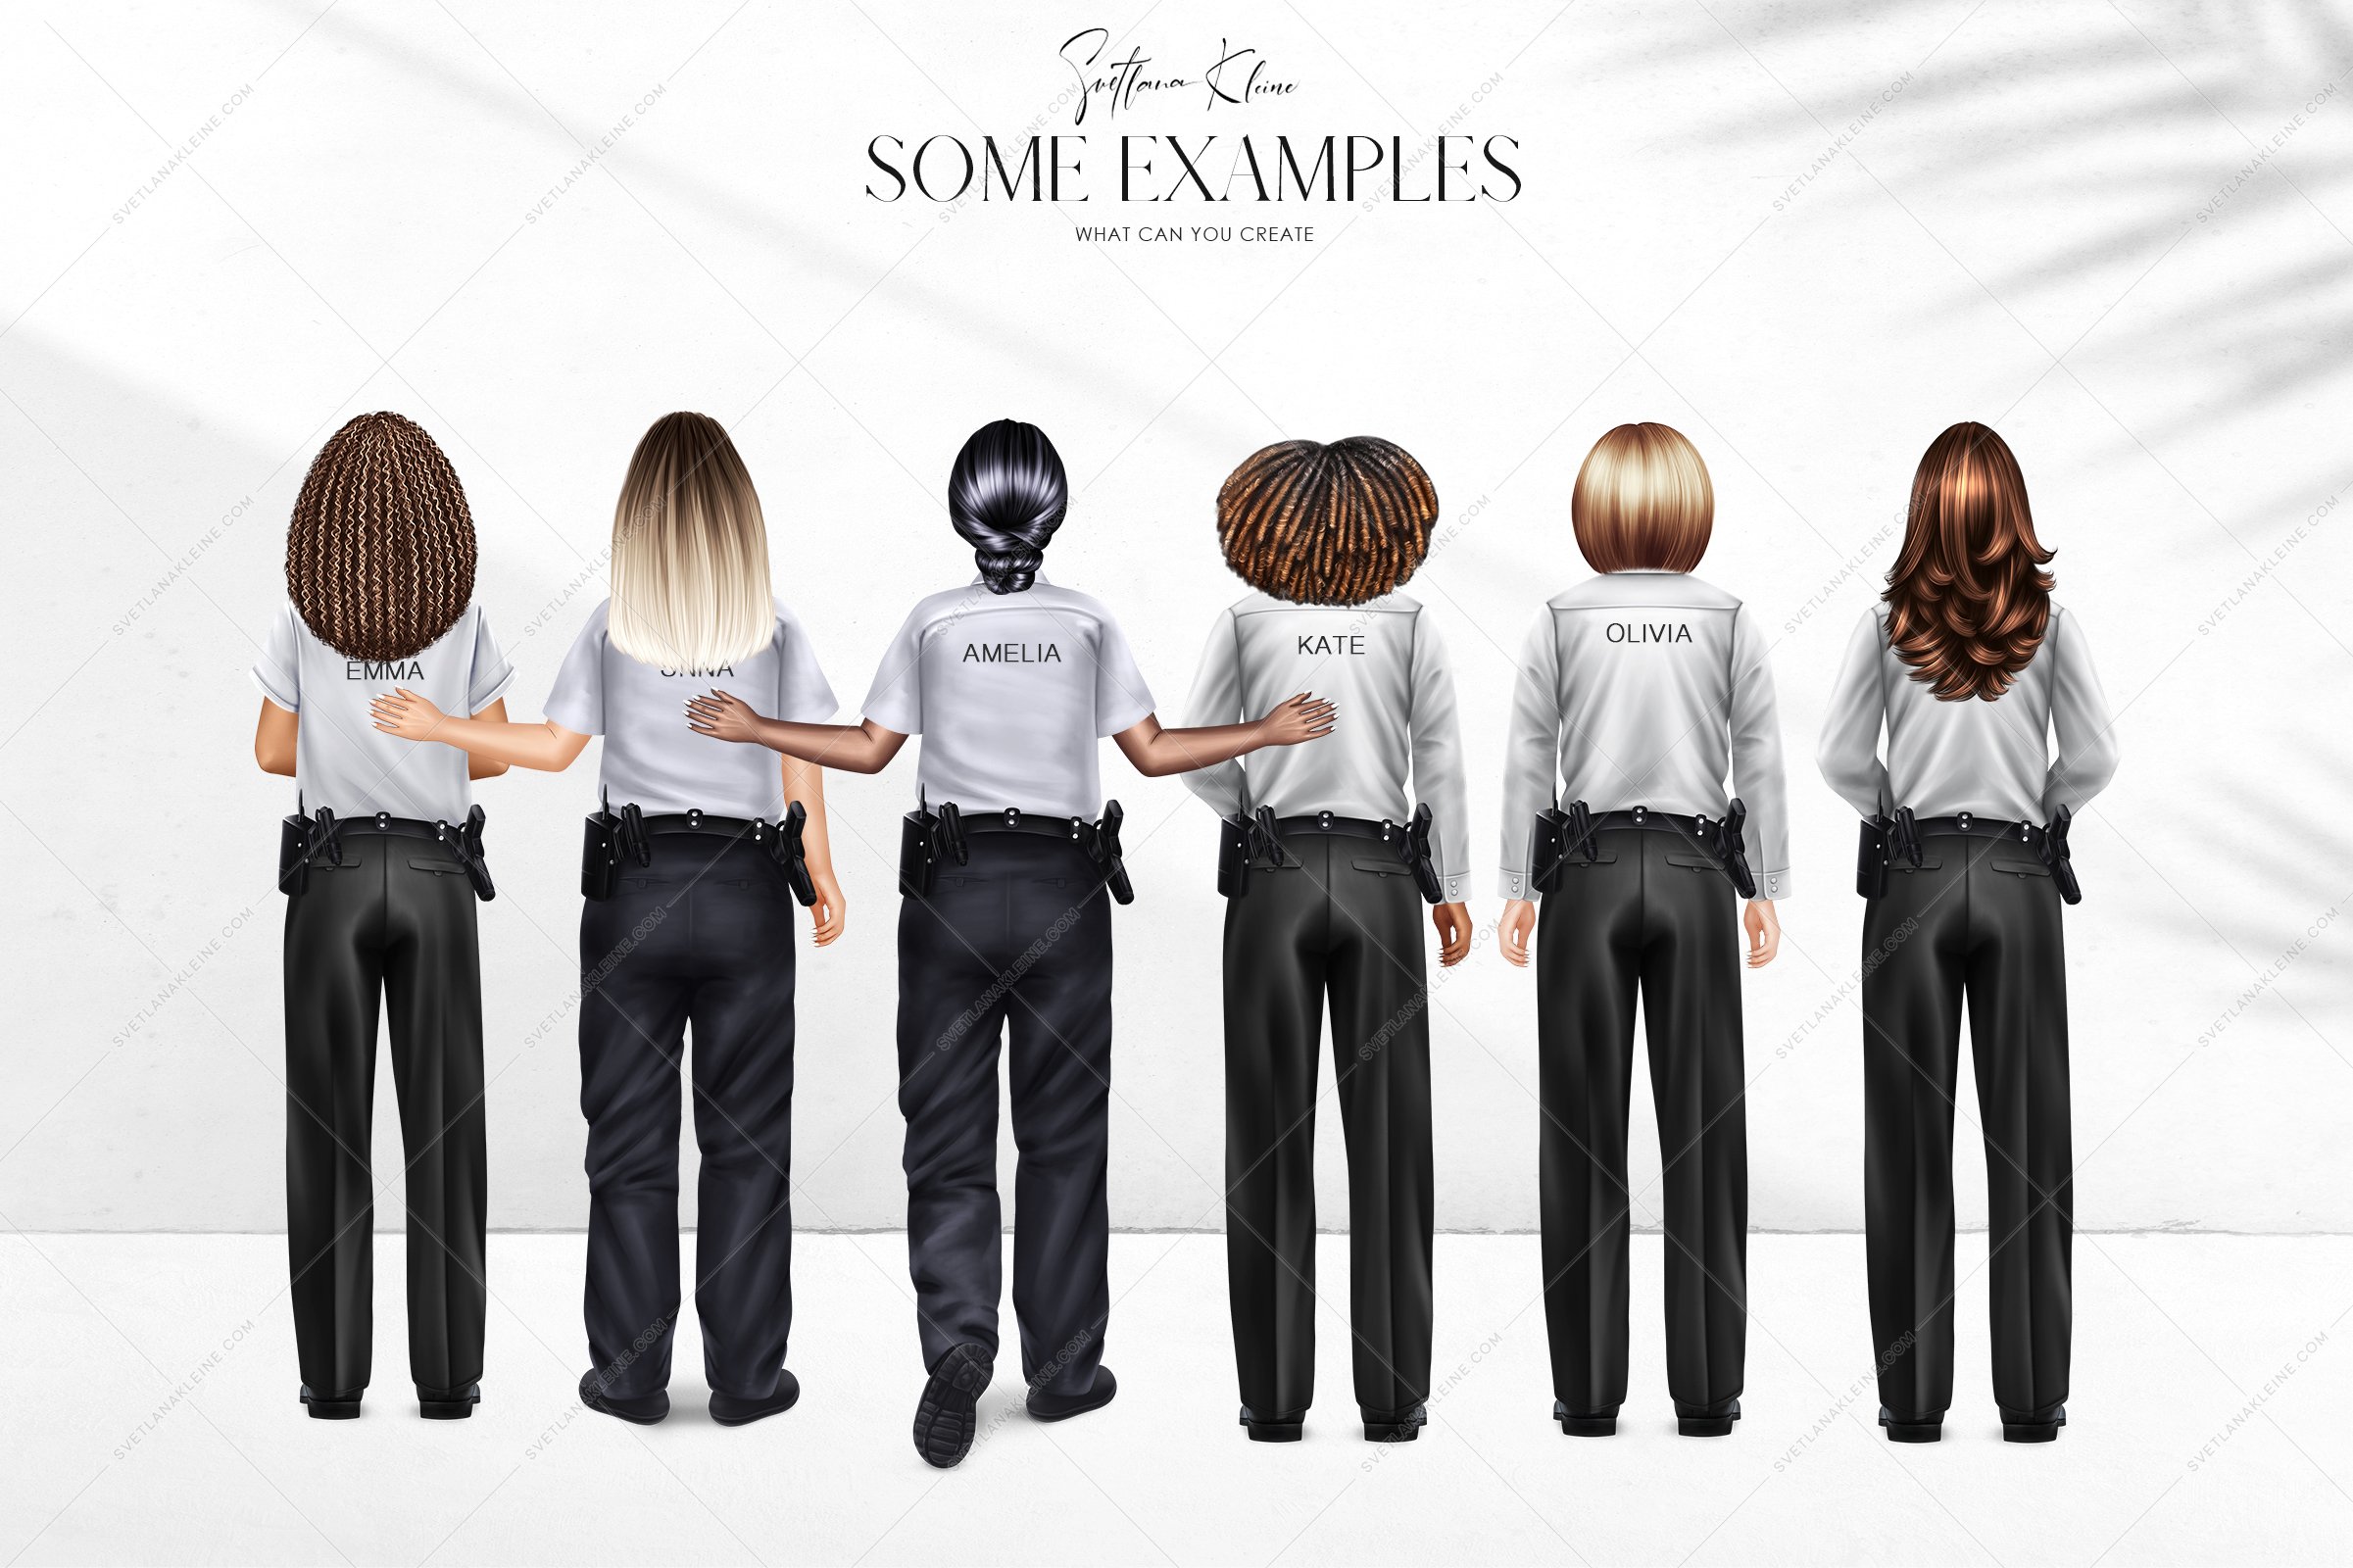 The black lettering "Some examples" and 6 women in grey shirts with black trousers and an inscription on the shirt with their names.